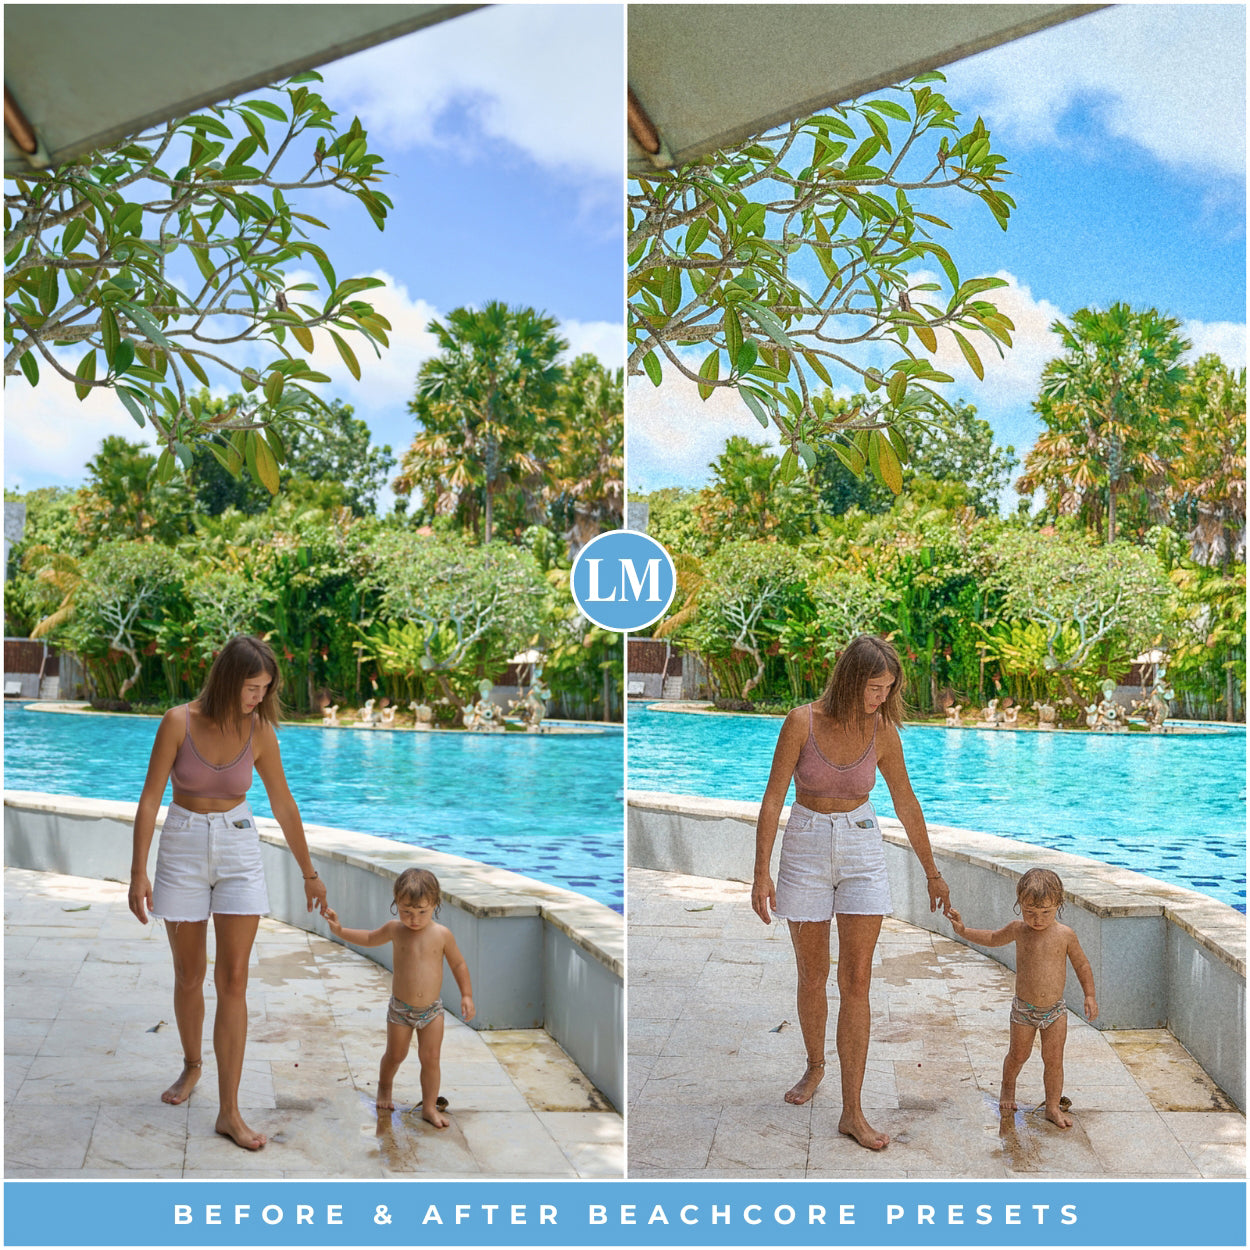 Portrait Beachcore Beach Lightroom Presets The Best Photo Editing Preset Filters For Lightroom Mobile And Desktop For Photographers and Instagram Influencers By Lou And Marks Presets